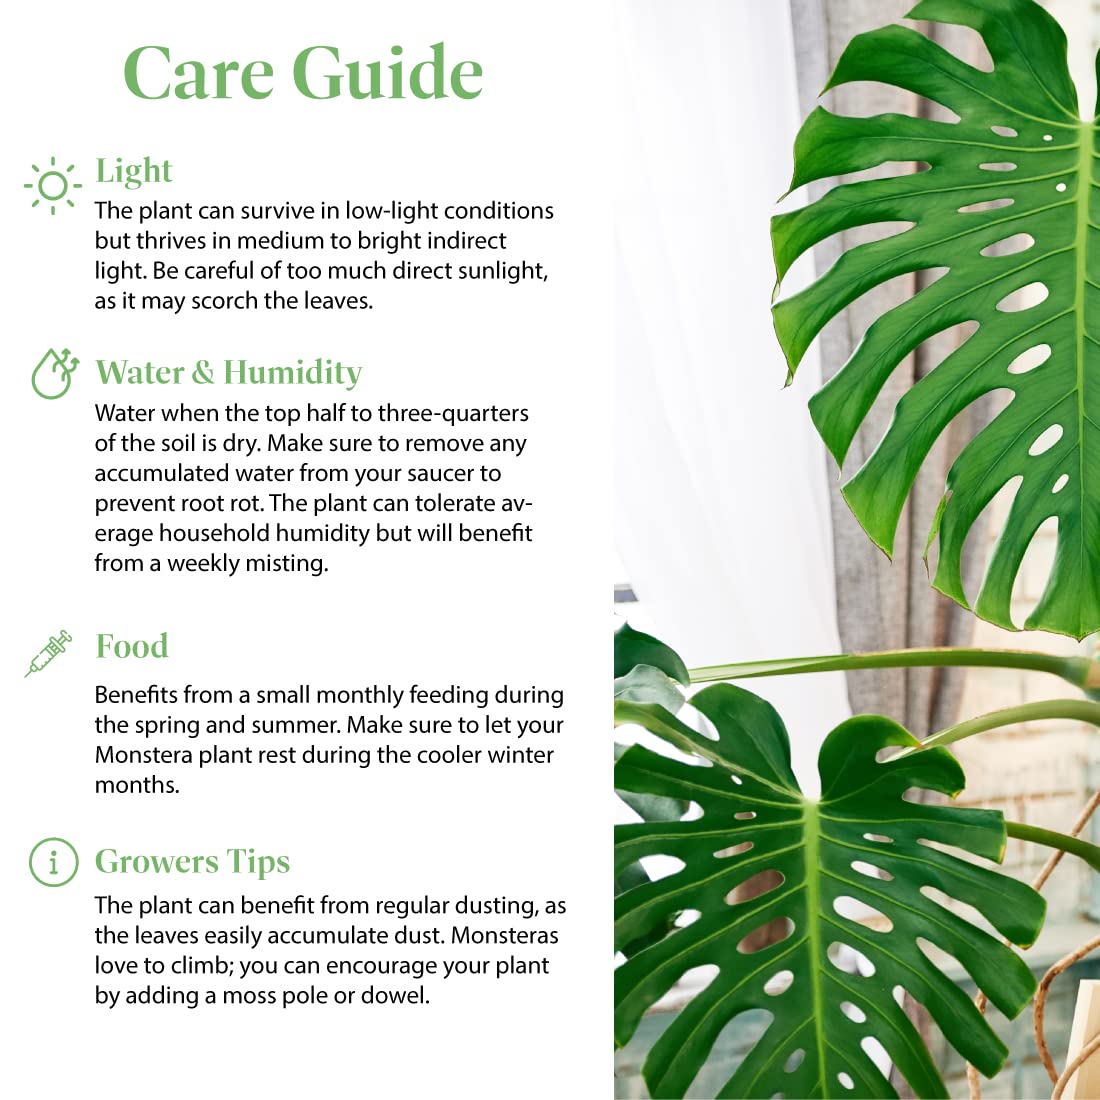 American Plant Exchange Live Monstera Deliciosa Plant with Edible Fruits, Split Leaf Philodendron Plant, Plant Pot for Home and Garden Decor, 10" Pot